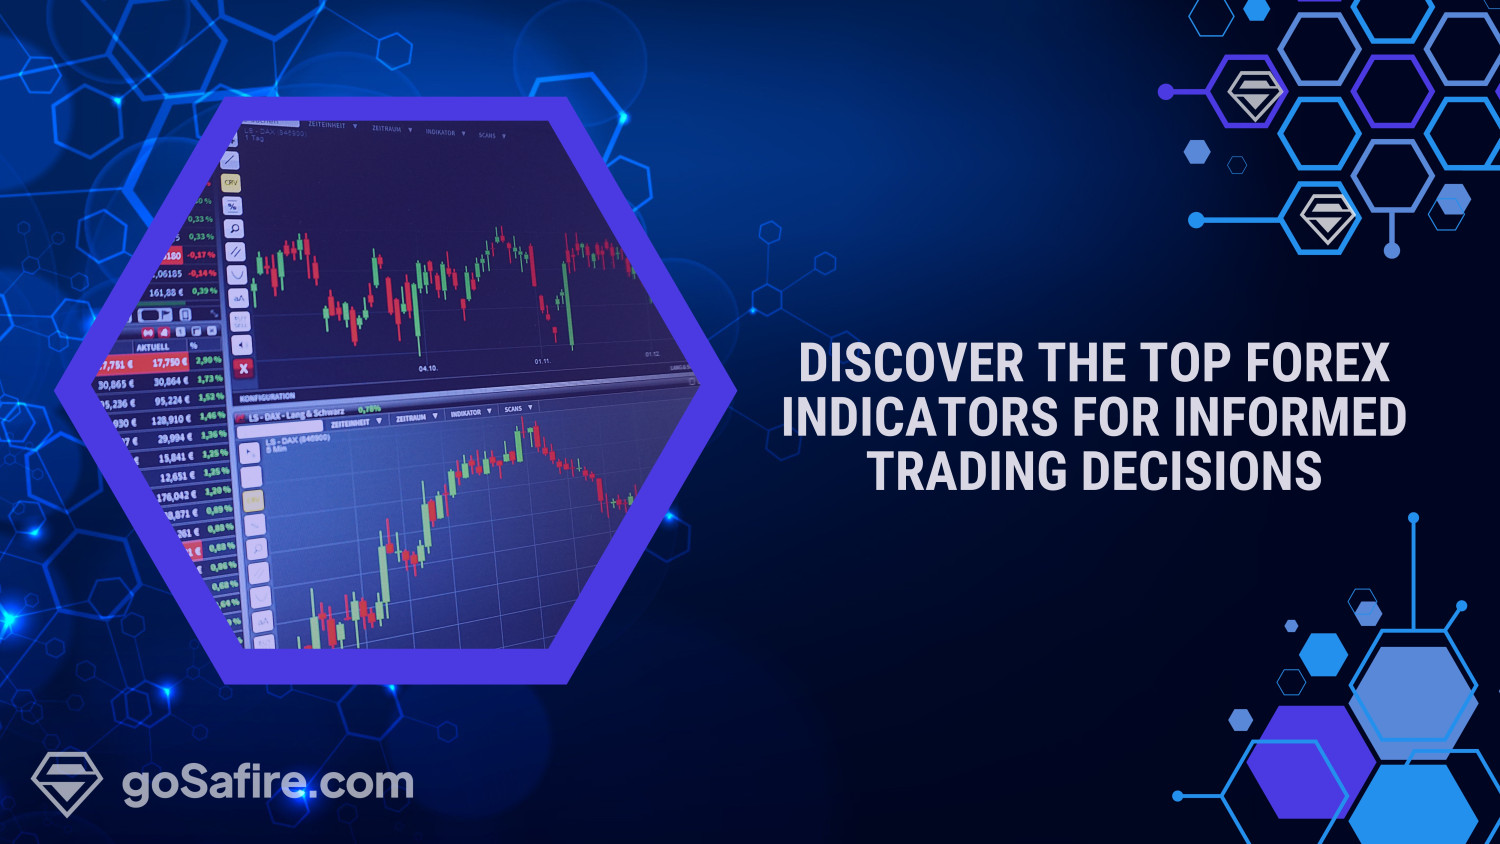 Discover the Top Forex Indicators for Informed Trading Decisions